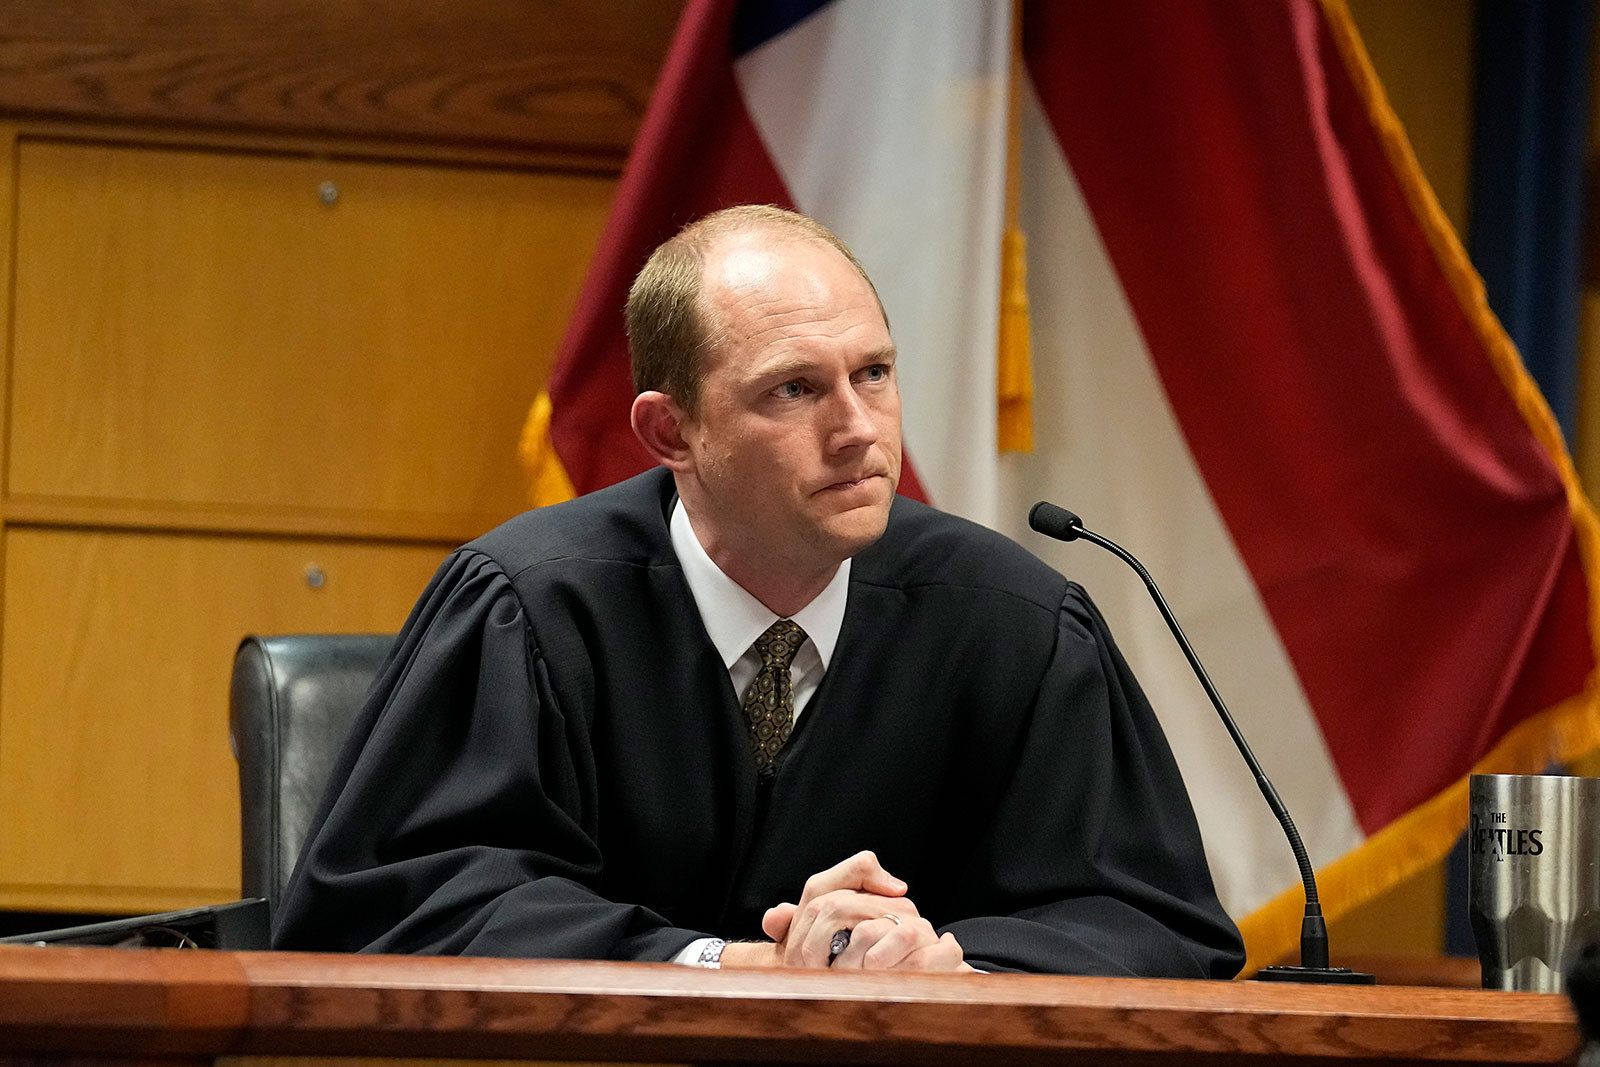 Fulton County Superior Judge Scott McAfee presides in court, on Tuesday, February 27.